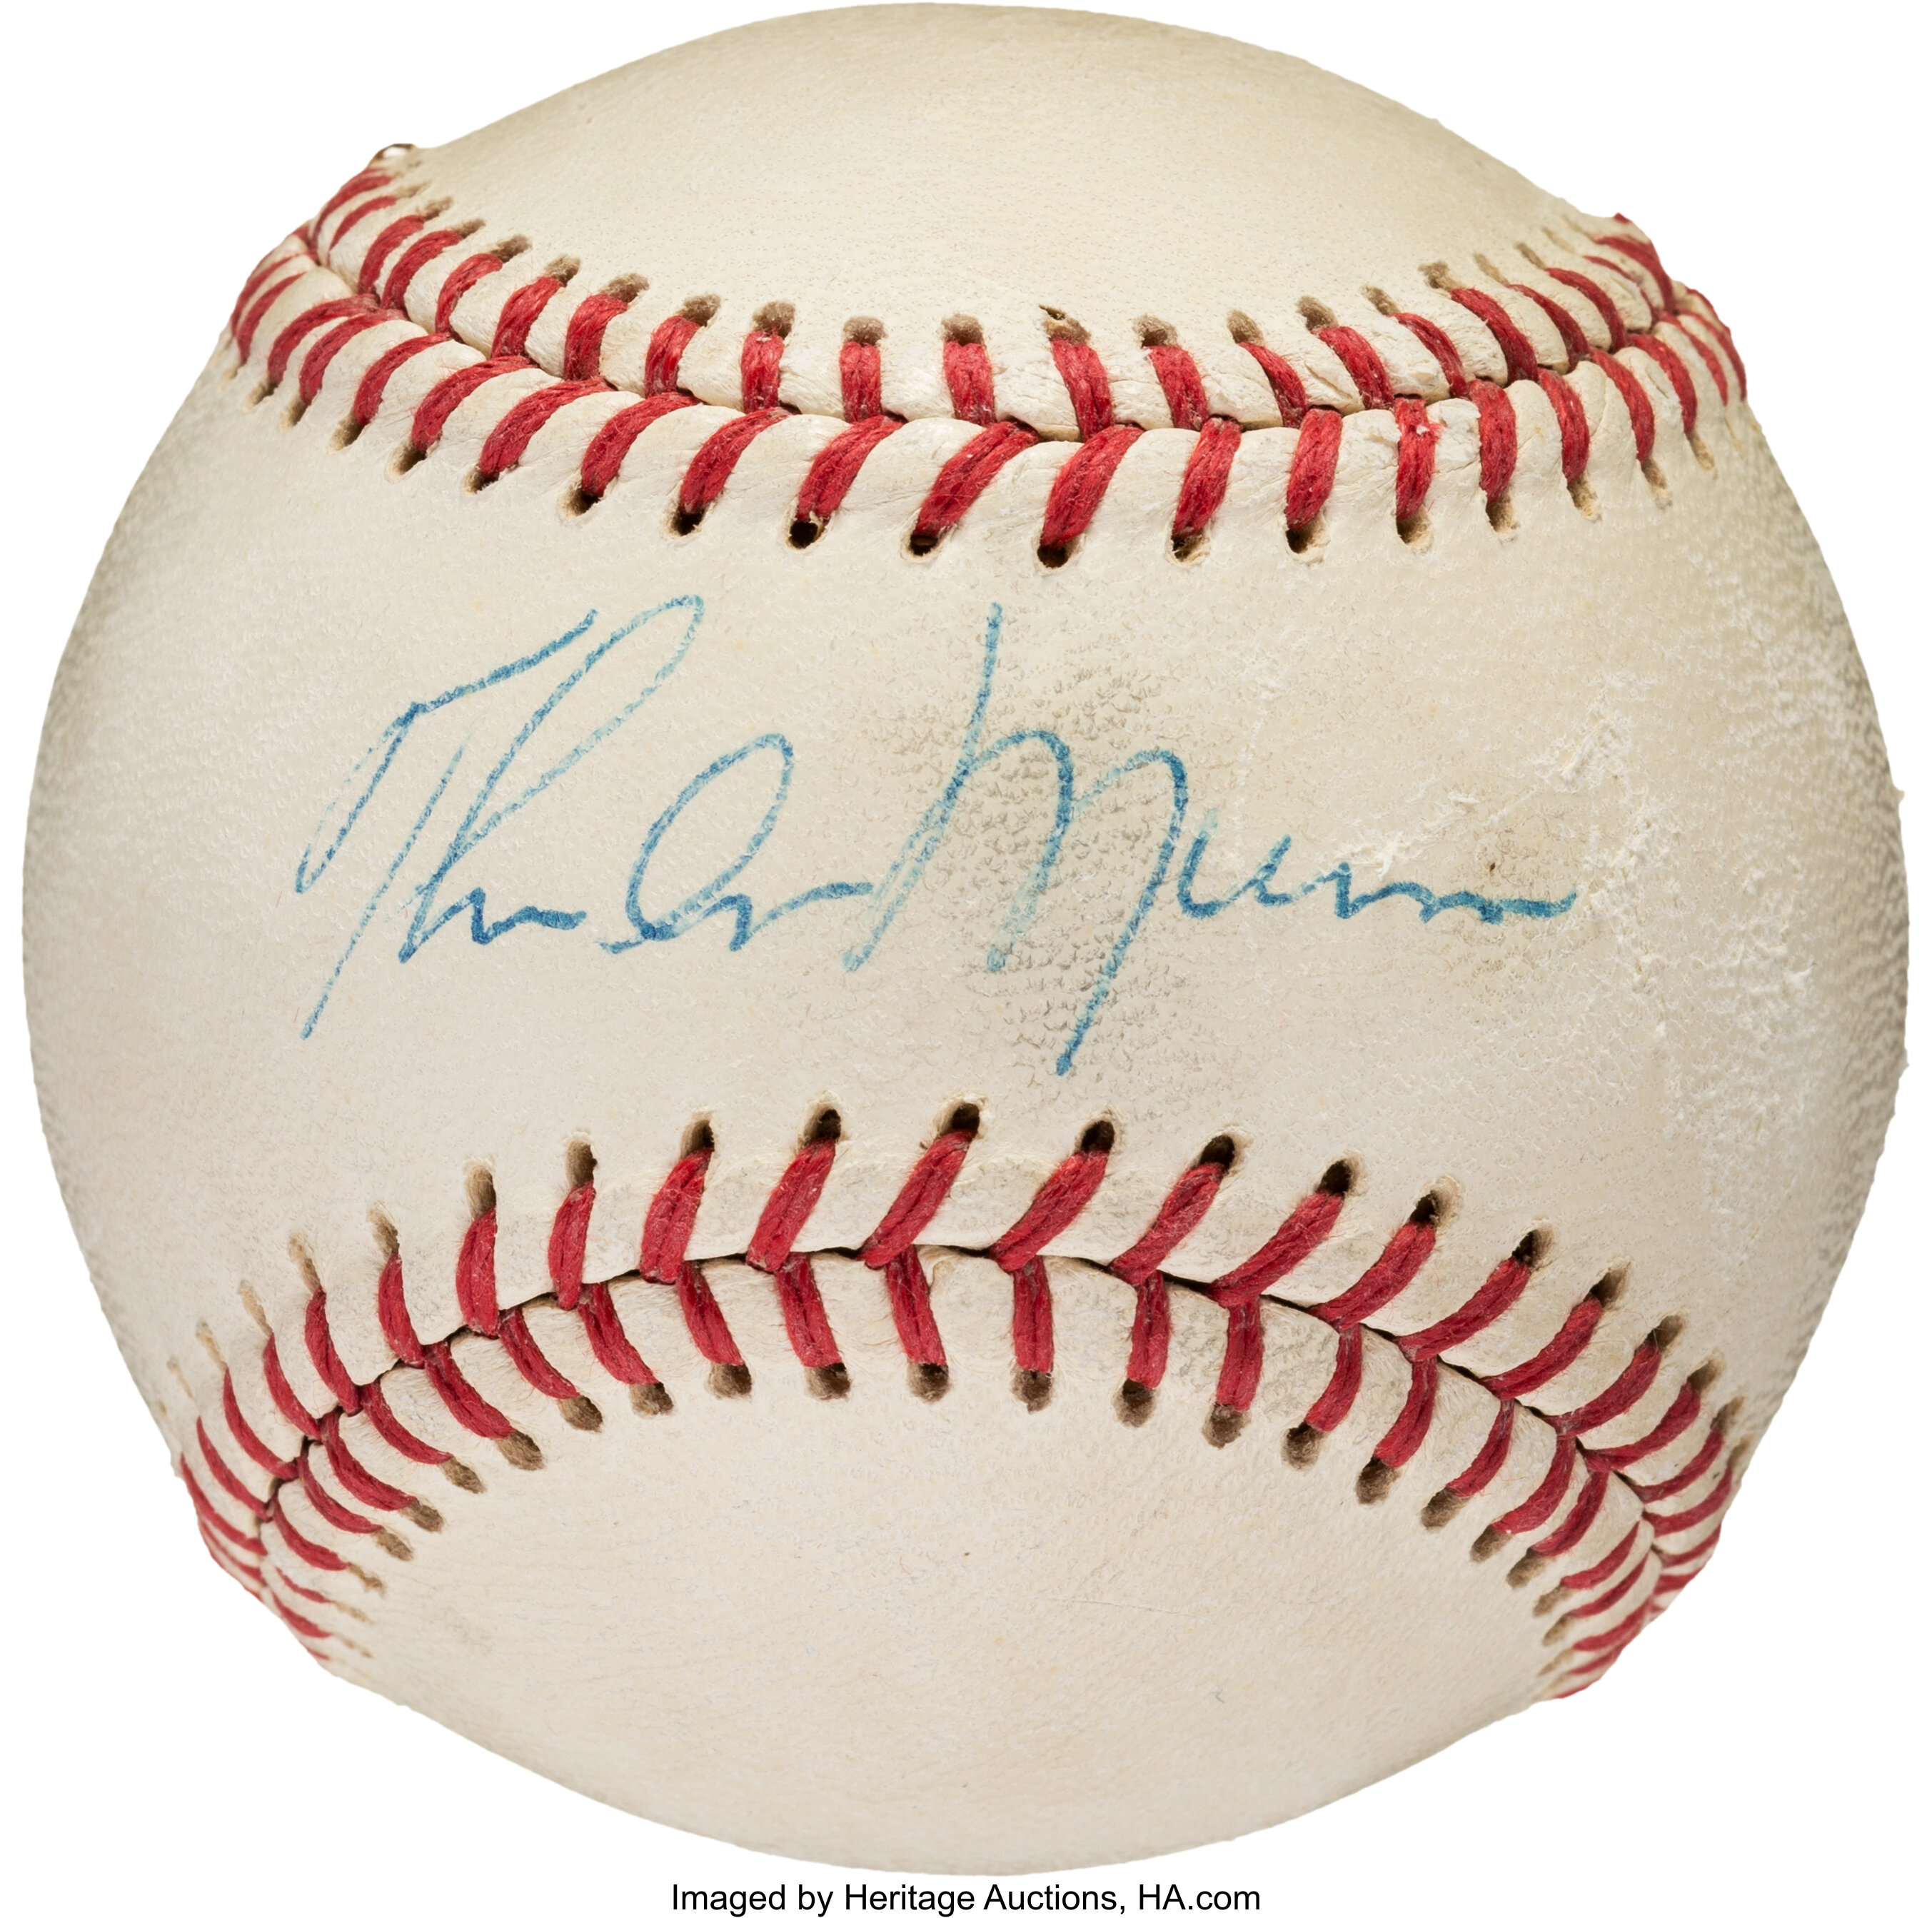 1979 Thurman Munson Single Signed Baseball Signed The Day He Died